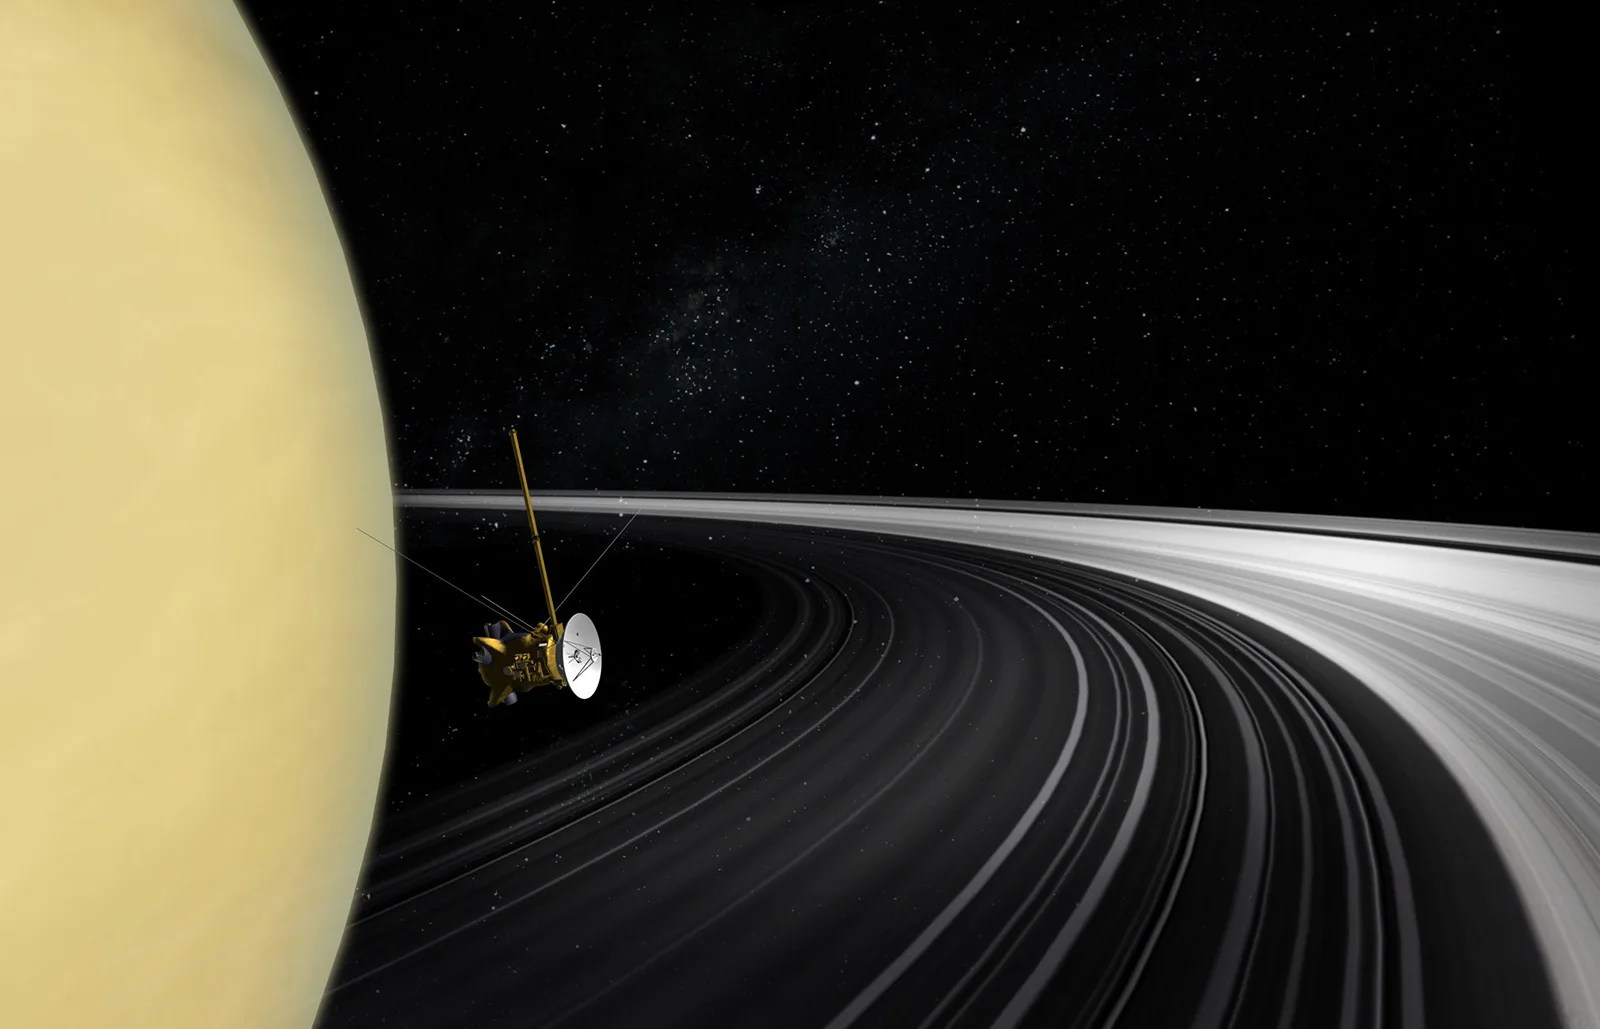 spacecraft passing between Saturn and the rings